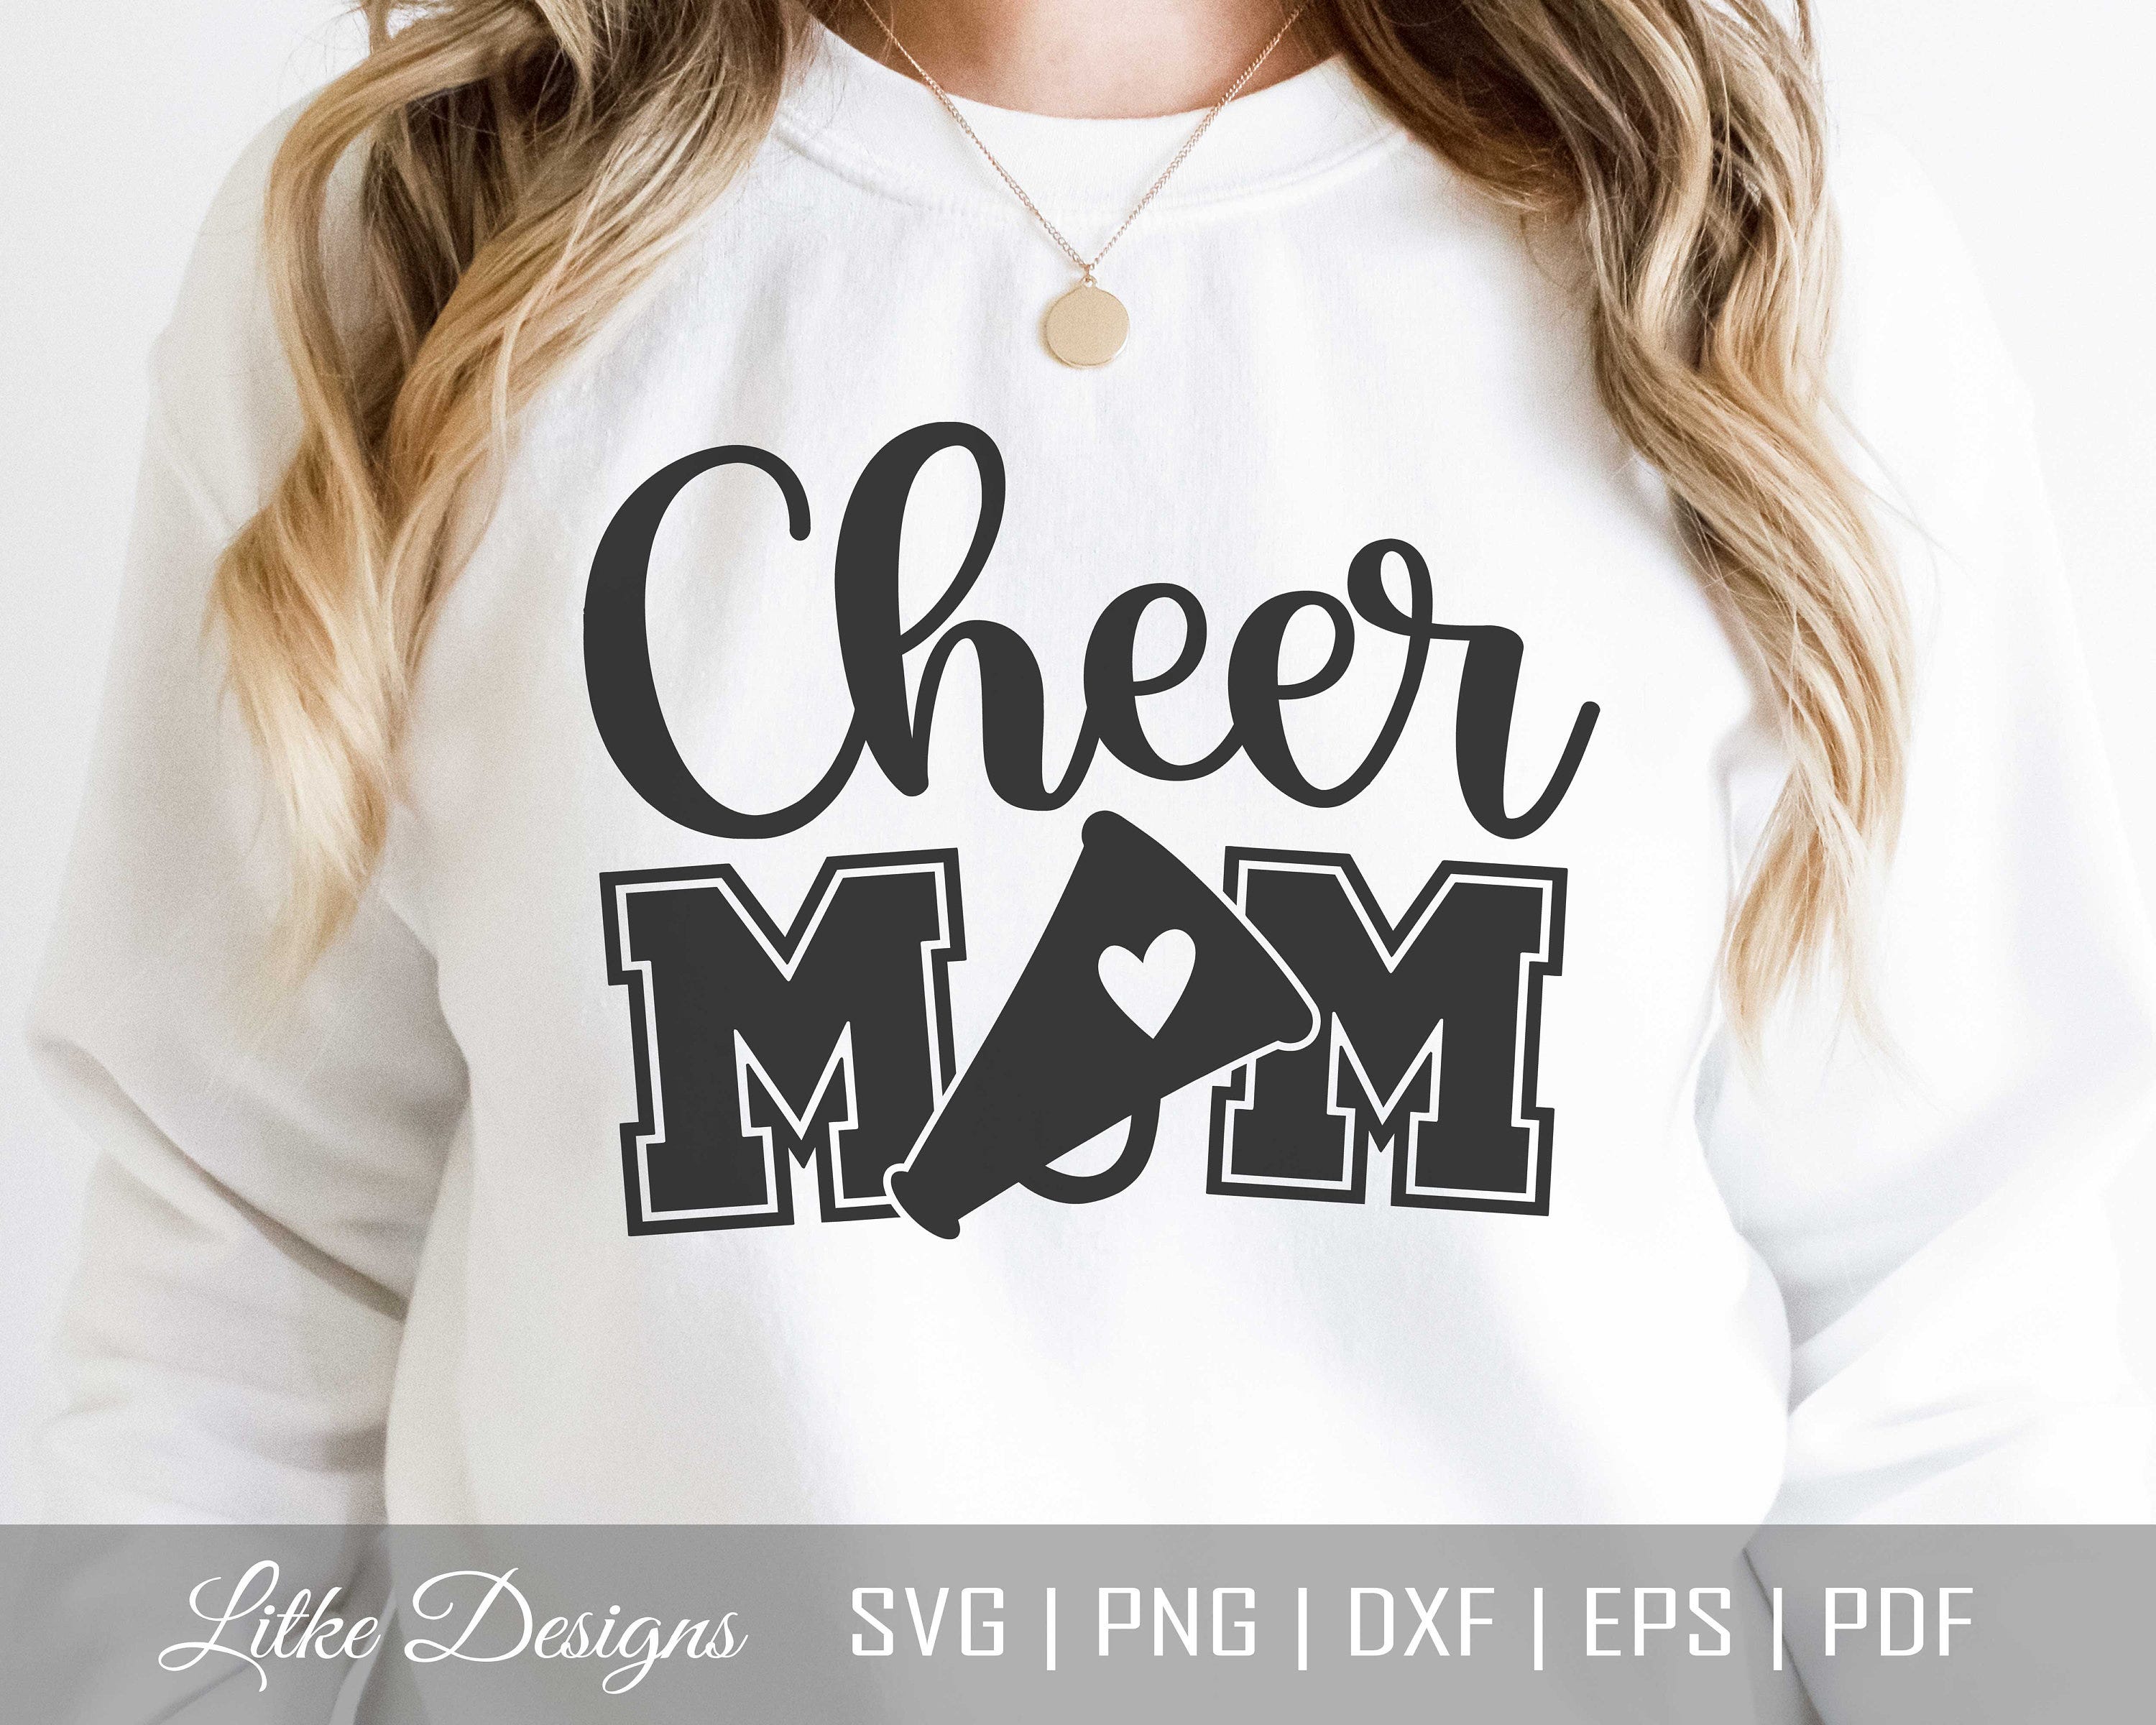 Cheer Mom Svg, Cheer Life Svg, Cheerleader Svg Files, Cheerleader Mom Designs, Mom Life Svg, Cut File For Cricut, Silhouette, Png, Dxf